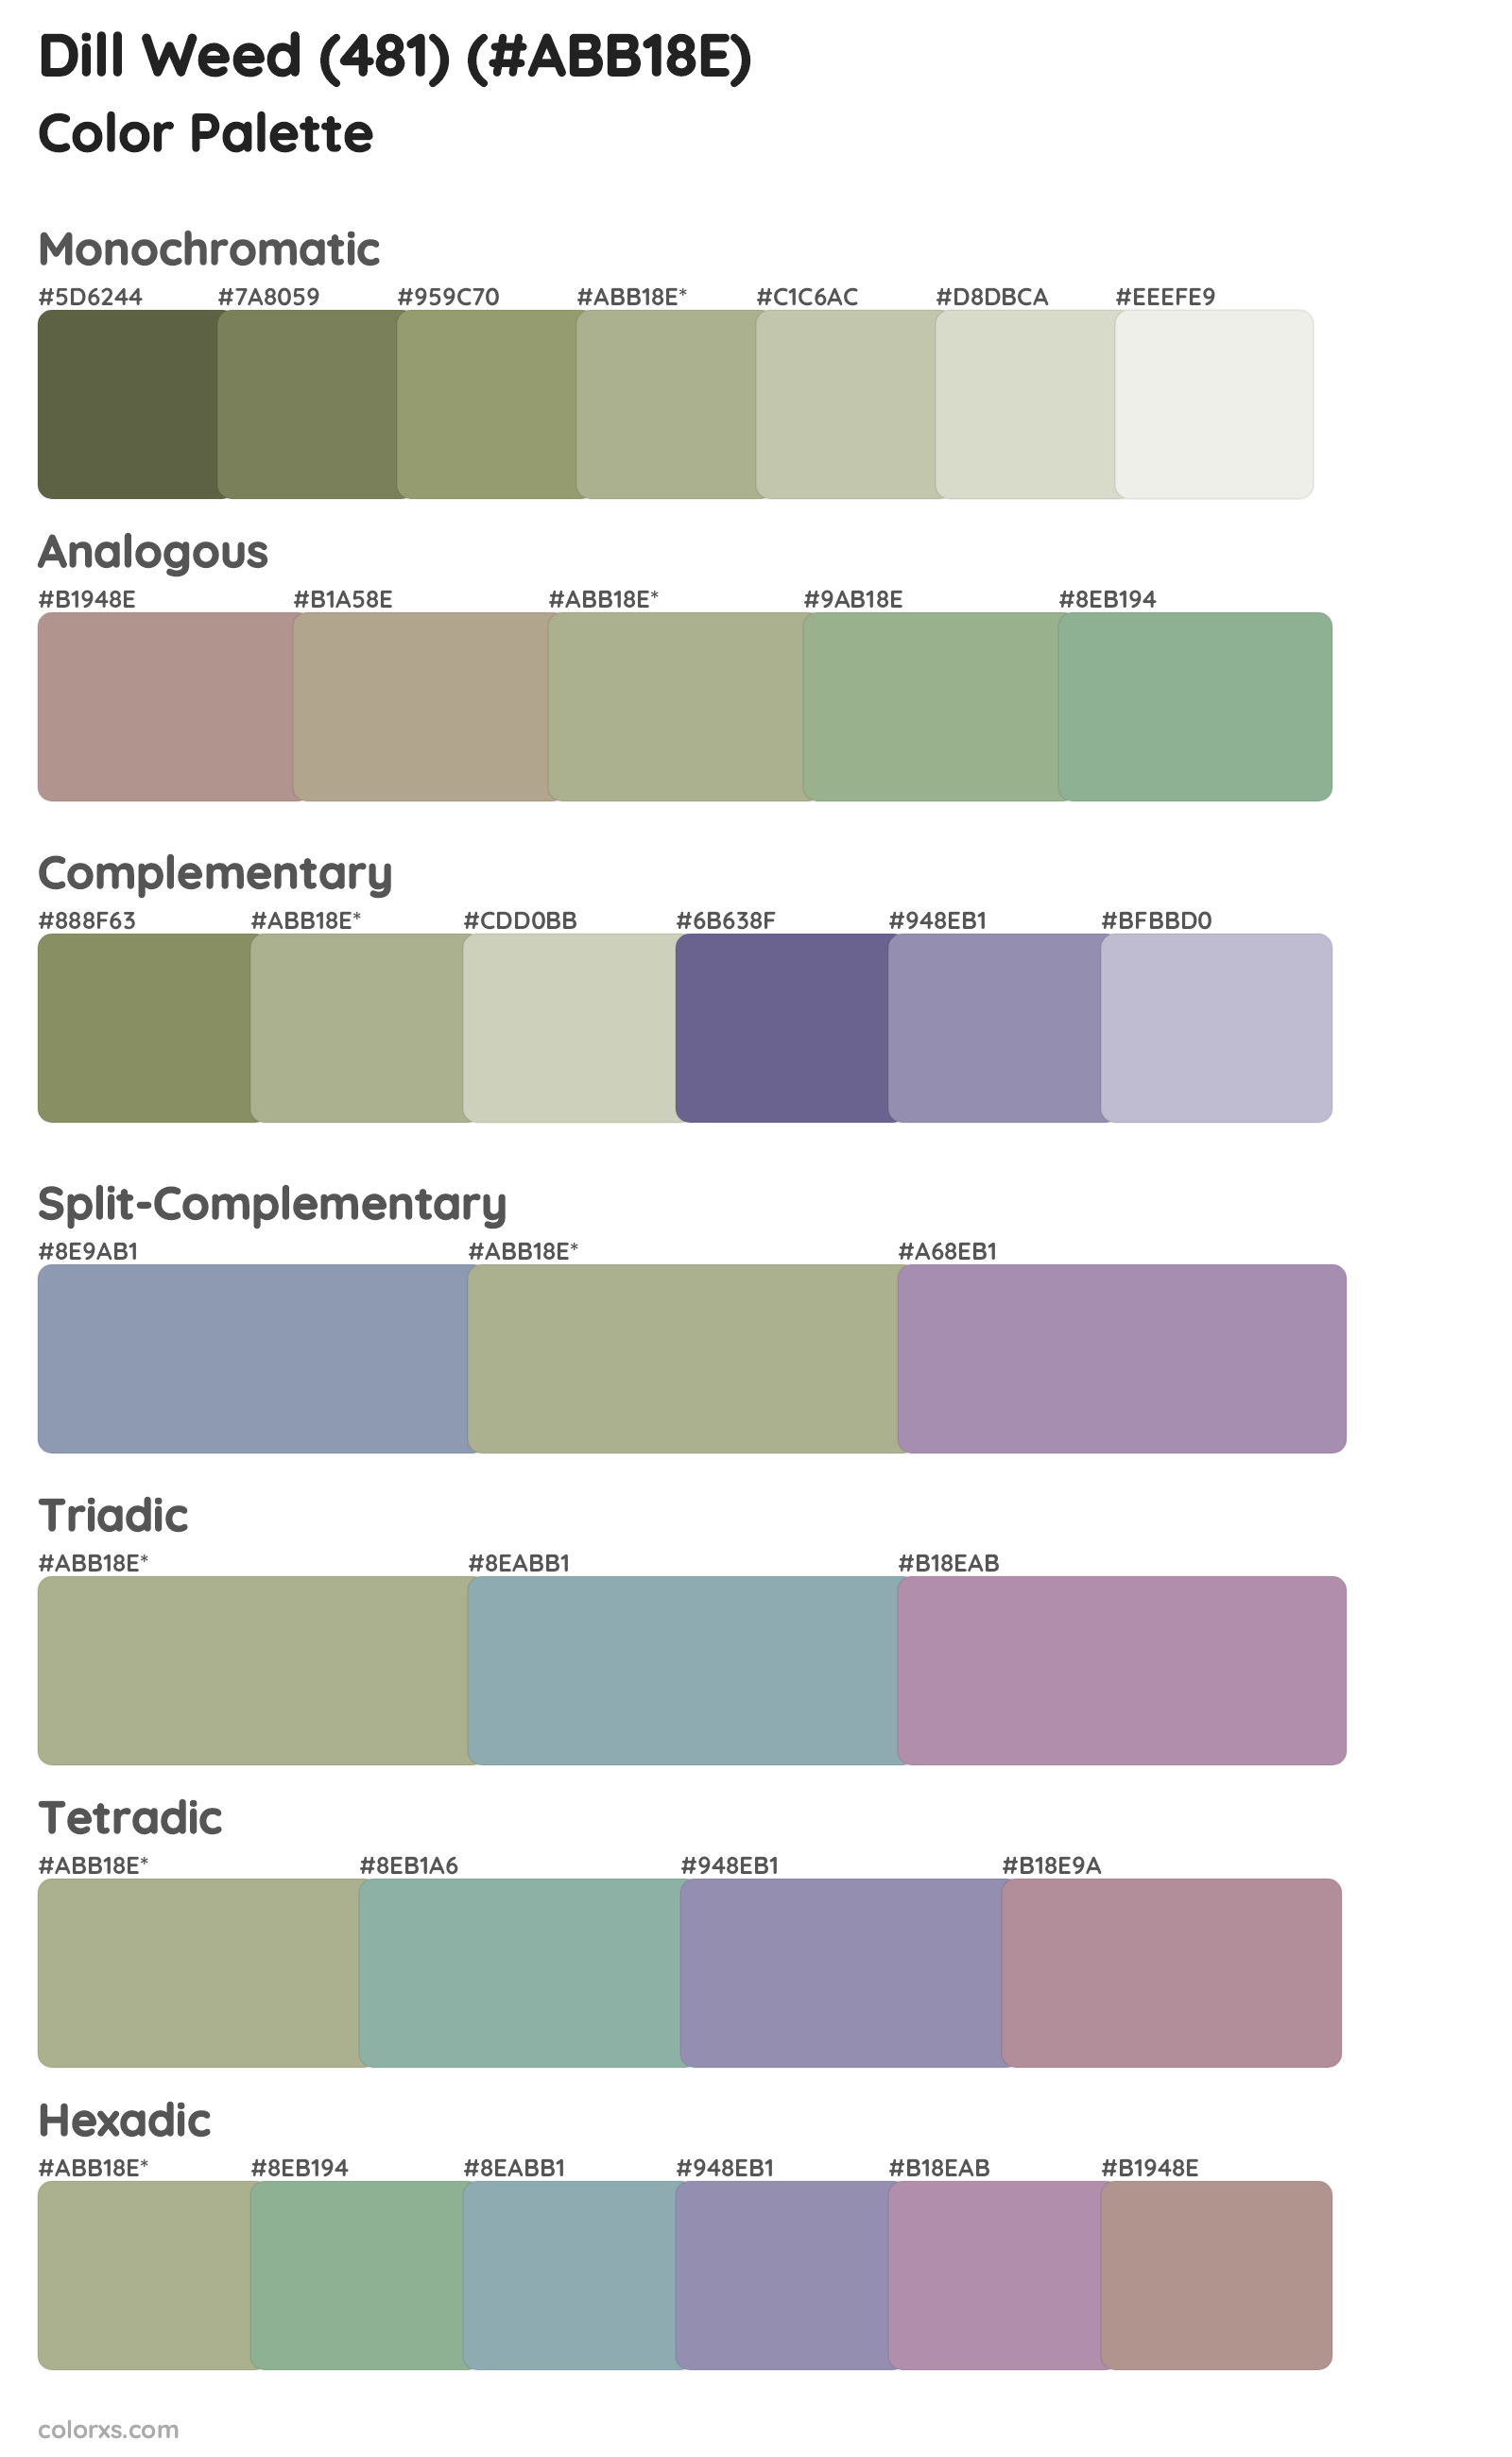 Dill Weed (481) Color Scheme Palettes